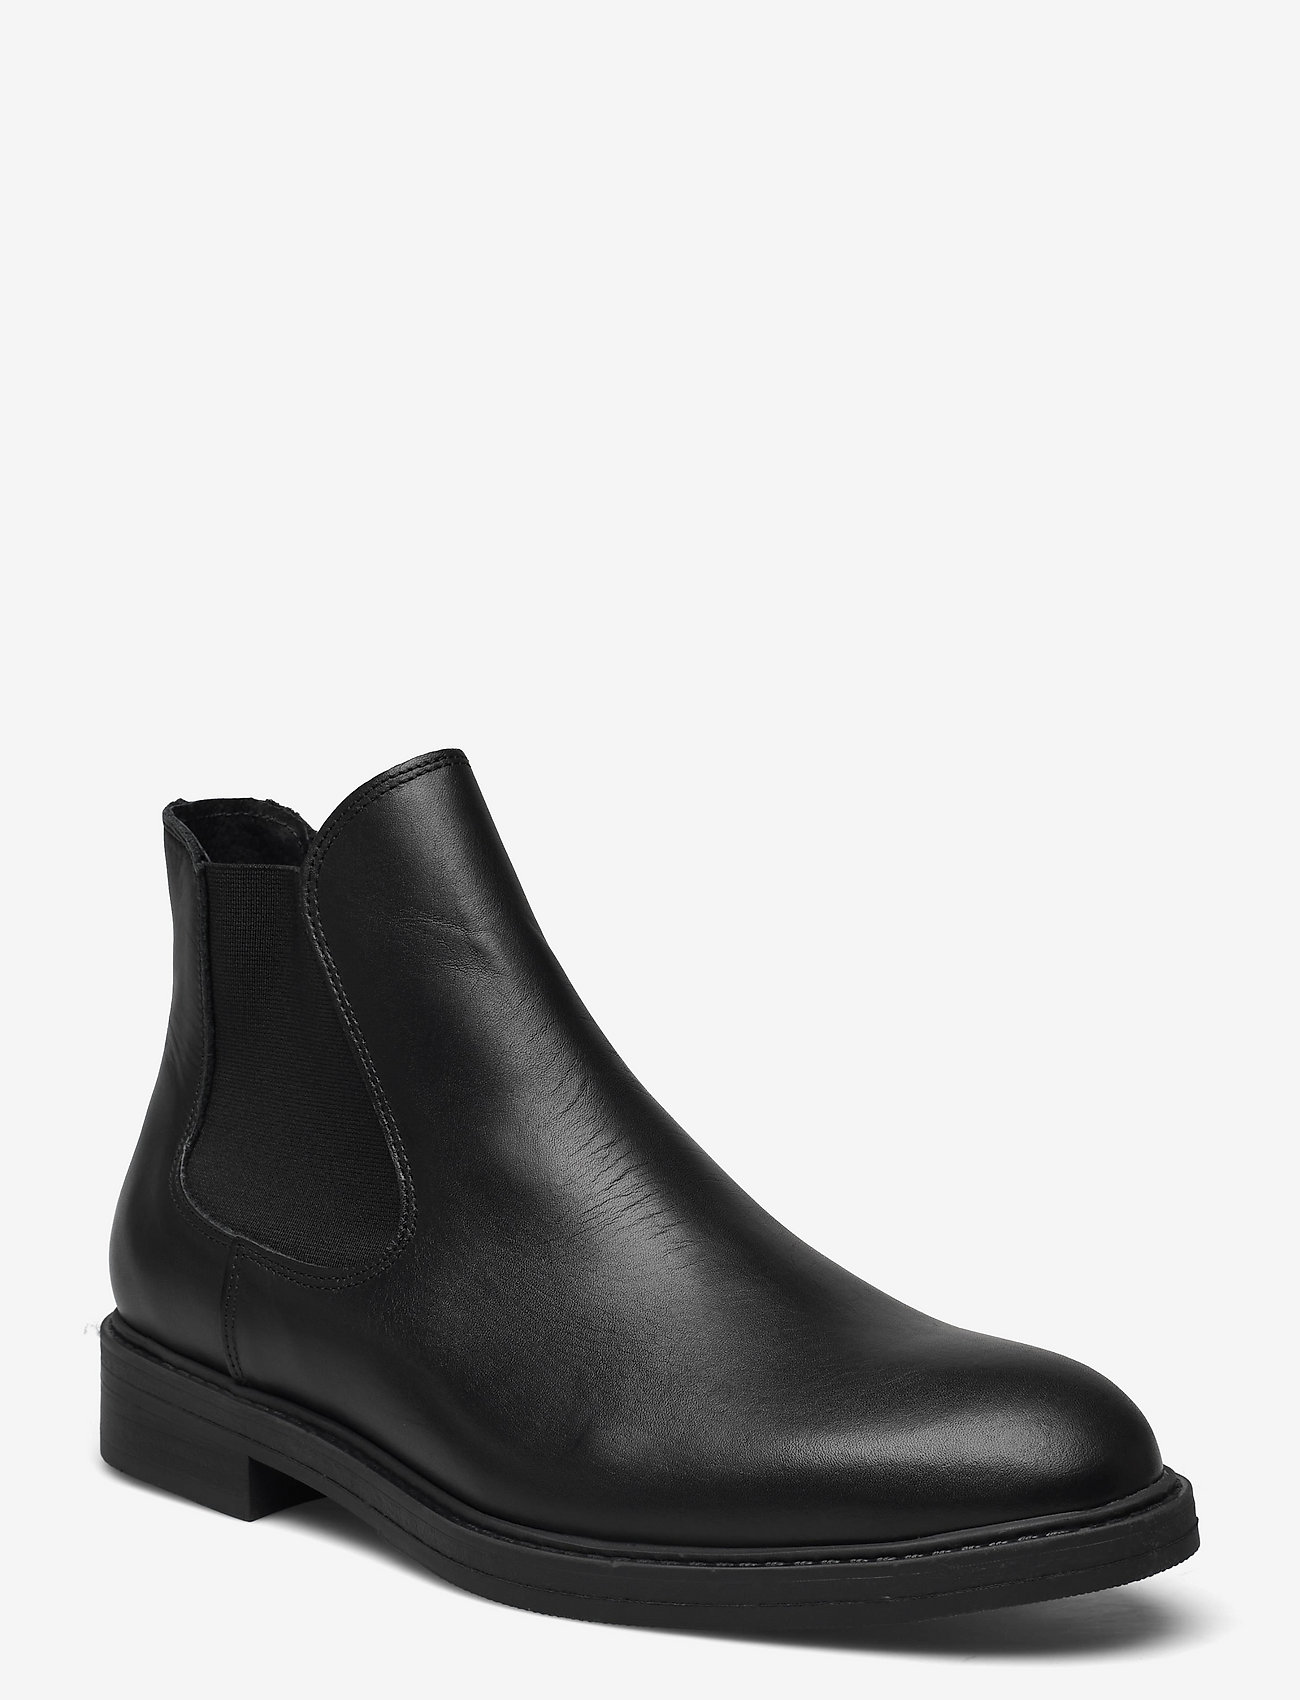 Selected Homme - SLHBLAKE LEATHER CHELSEA BOOT NOOS - gimtadienio dovanos - black - 0